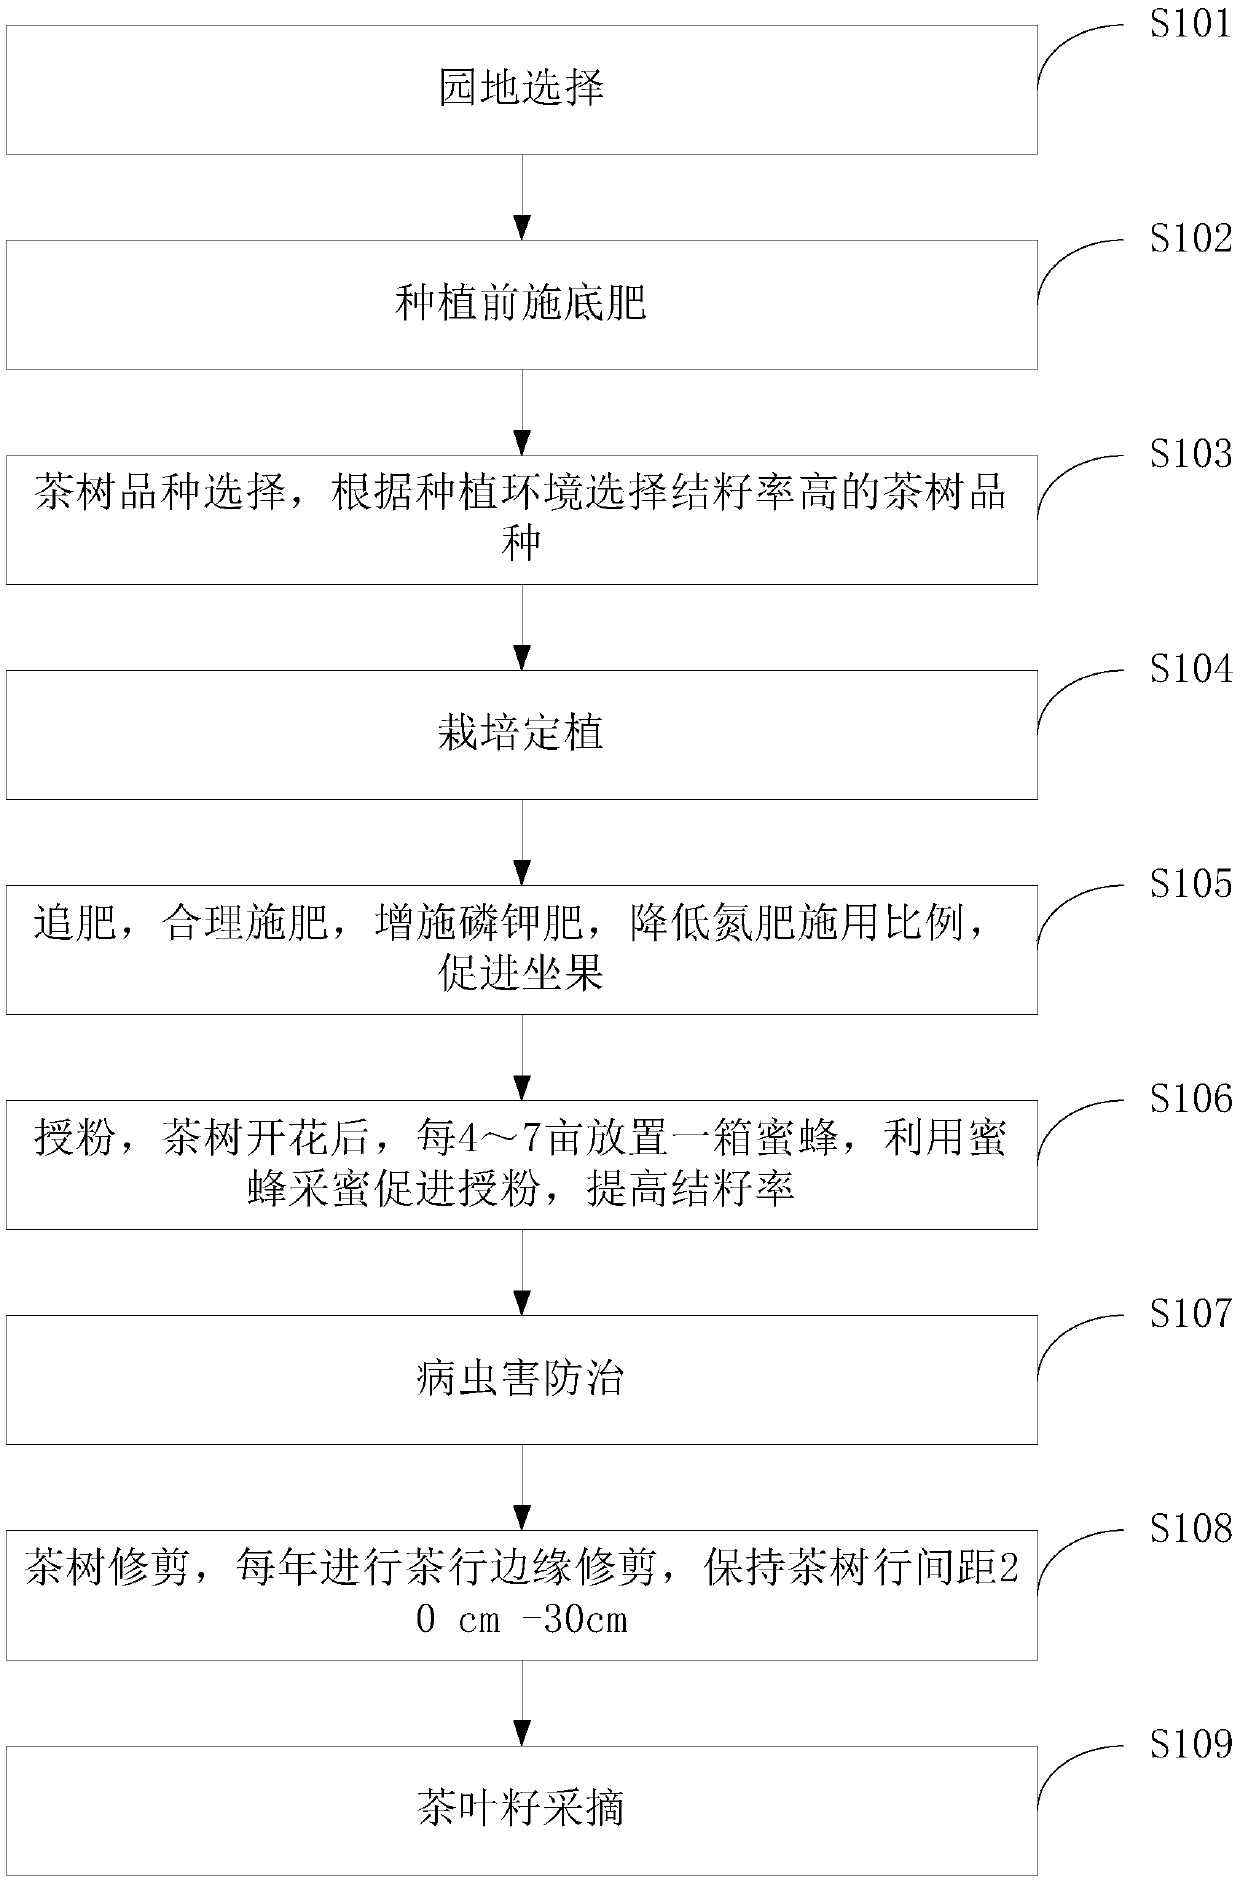 Tea tree cultivation method for improving tea seed yield based on neutron detectors and water collecting devices